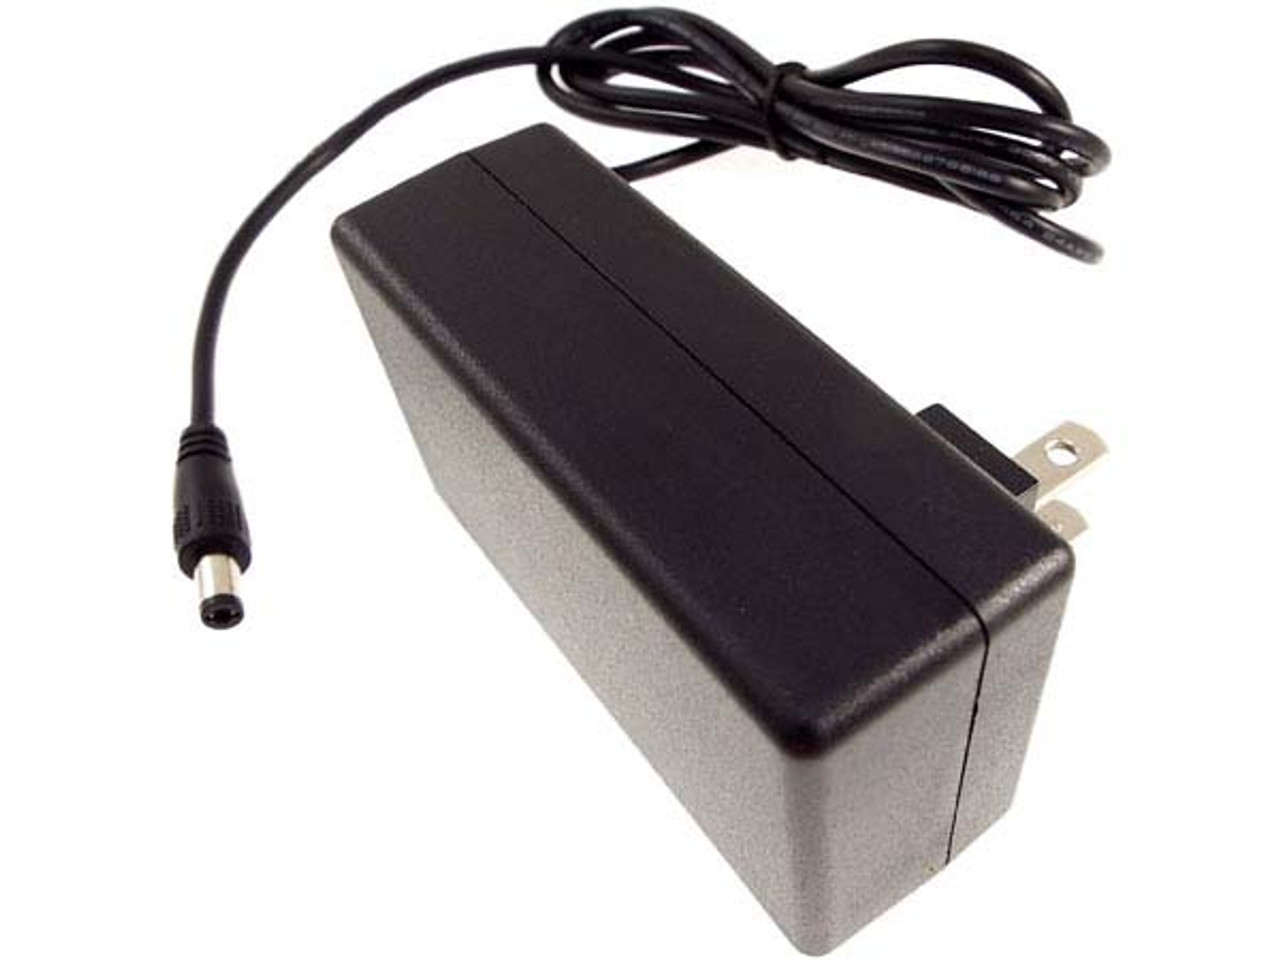 12V 2000mA UL-Listed Power Adapter, 110 VAC to 12 VDC, 2A